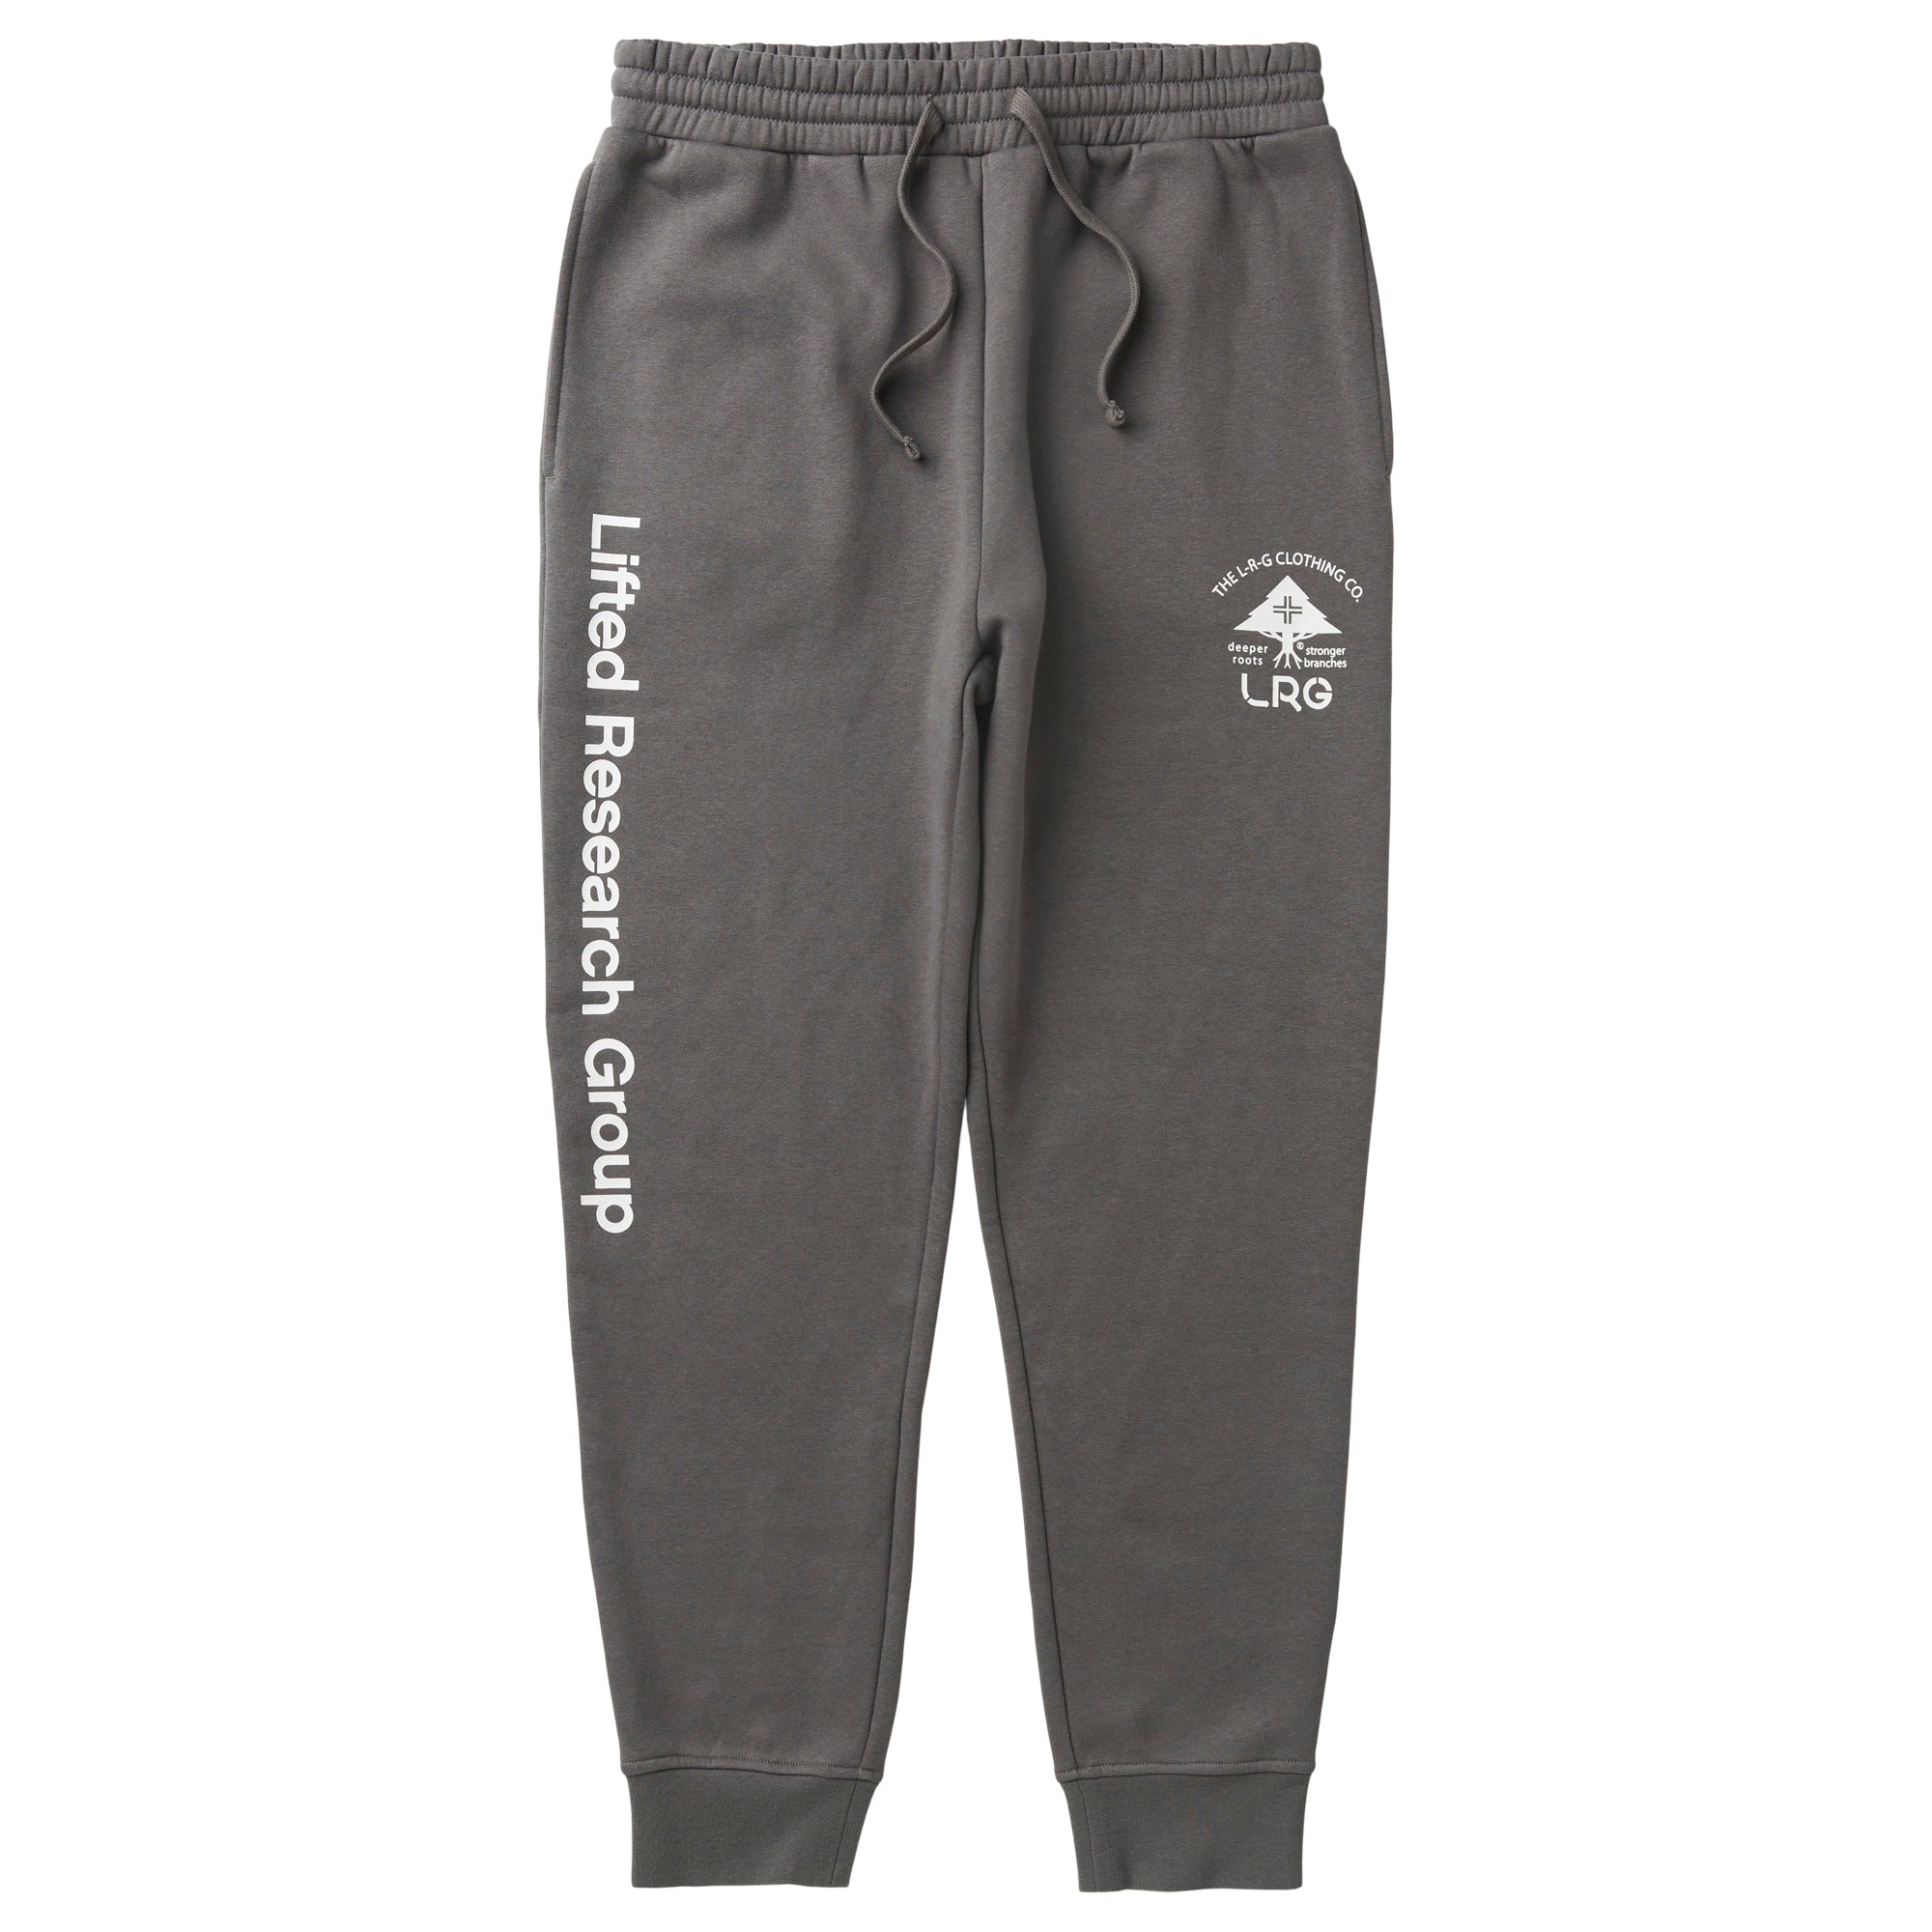 Roots just launched limited edition sweats for International